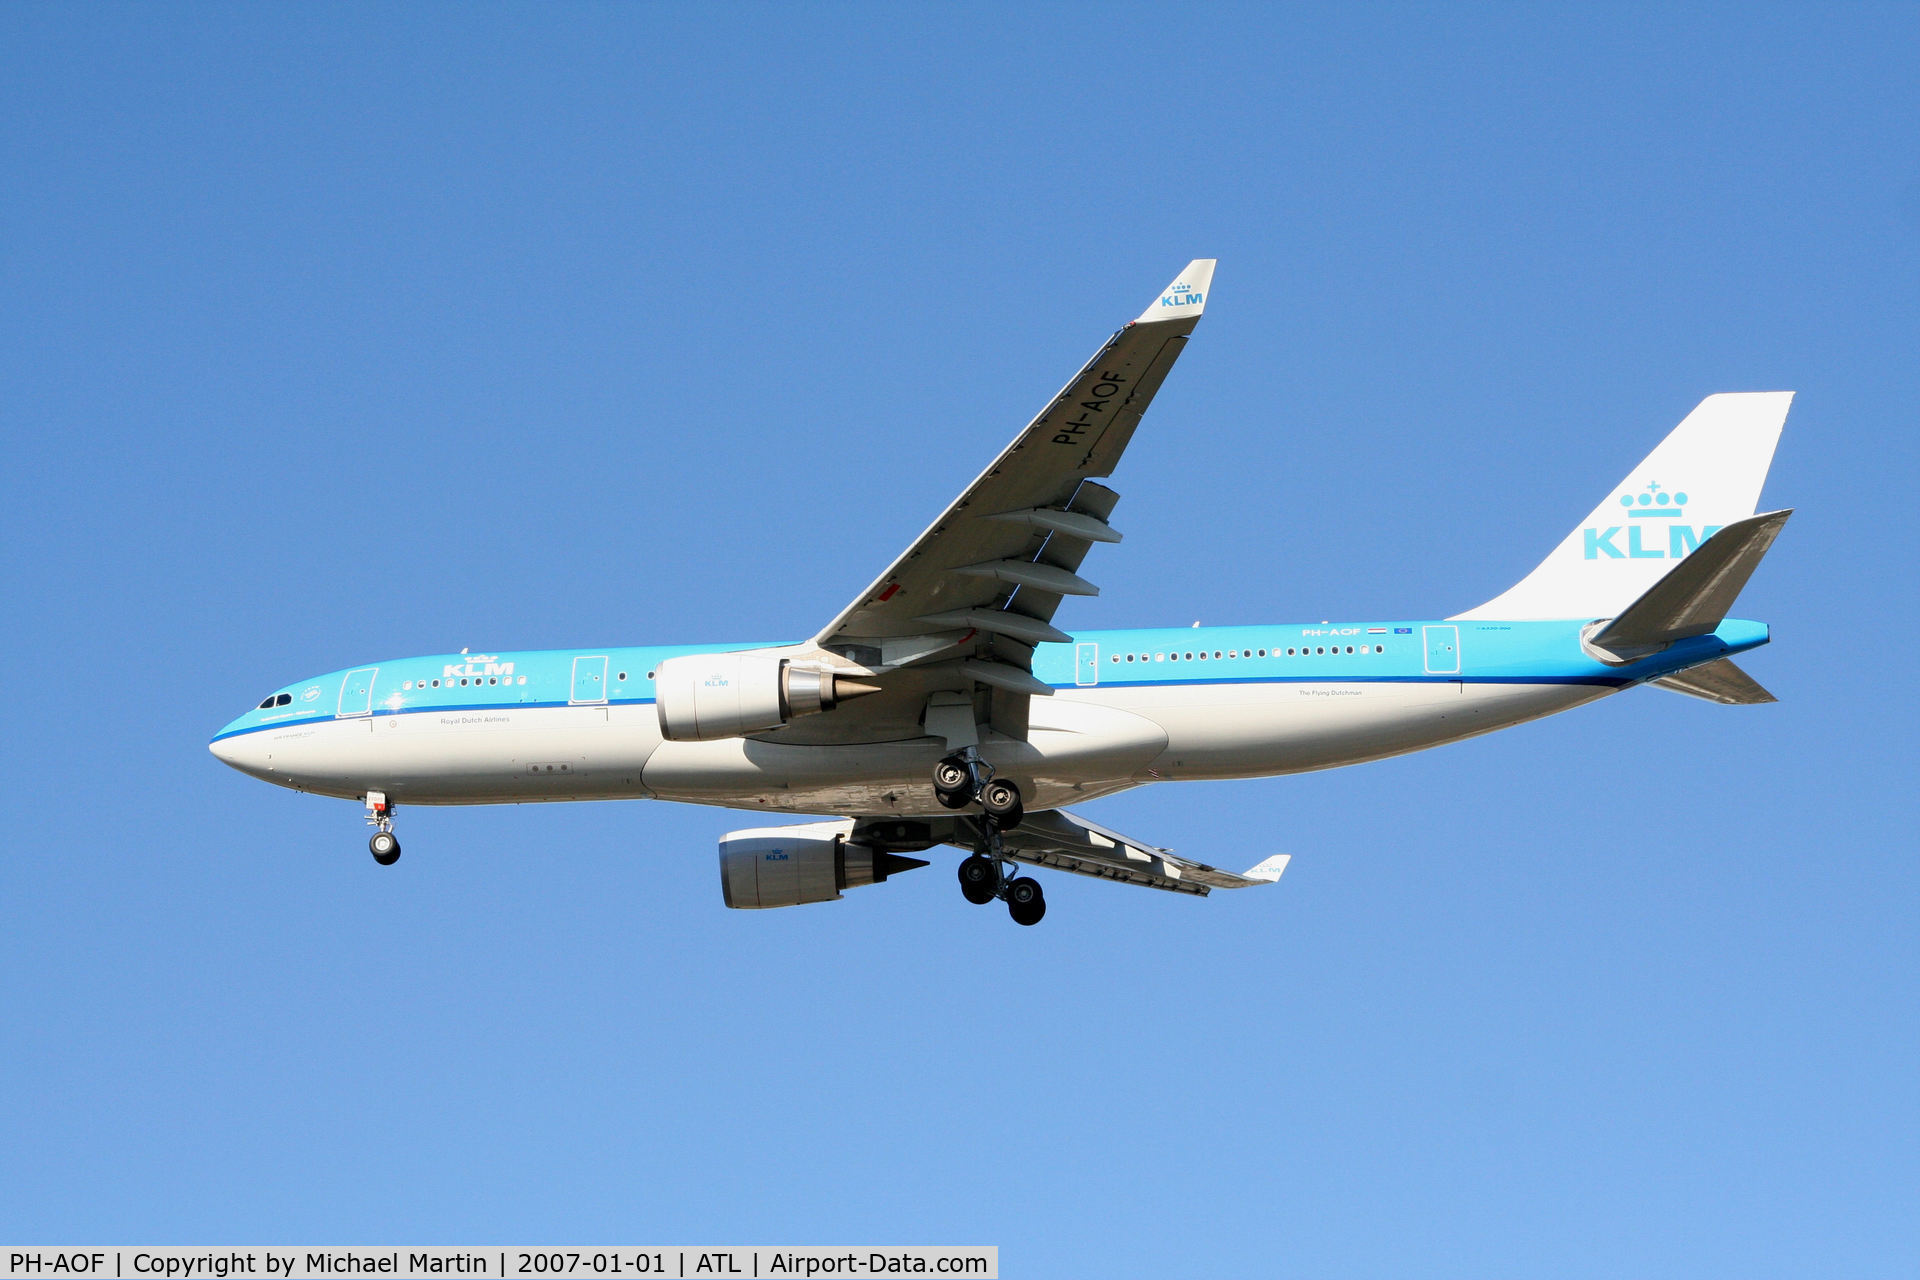 PH-AOF, 2006 Airbus A330-203 C/N 801, On final for Runway 26L